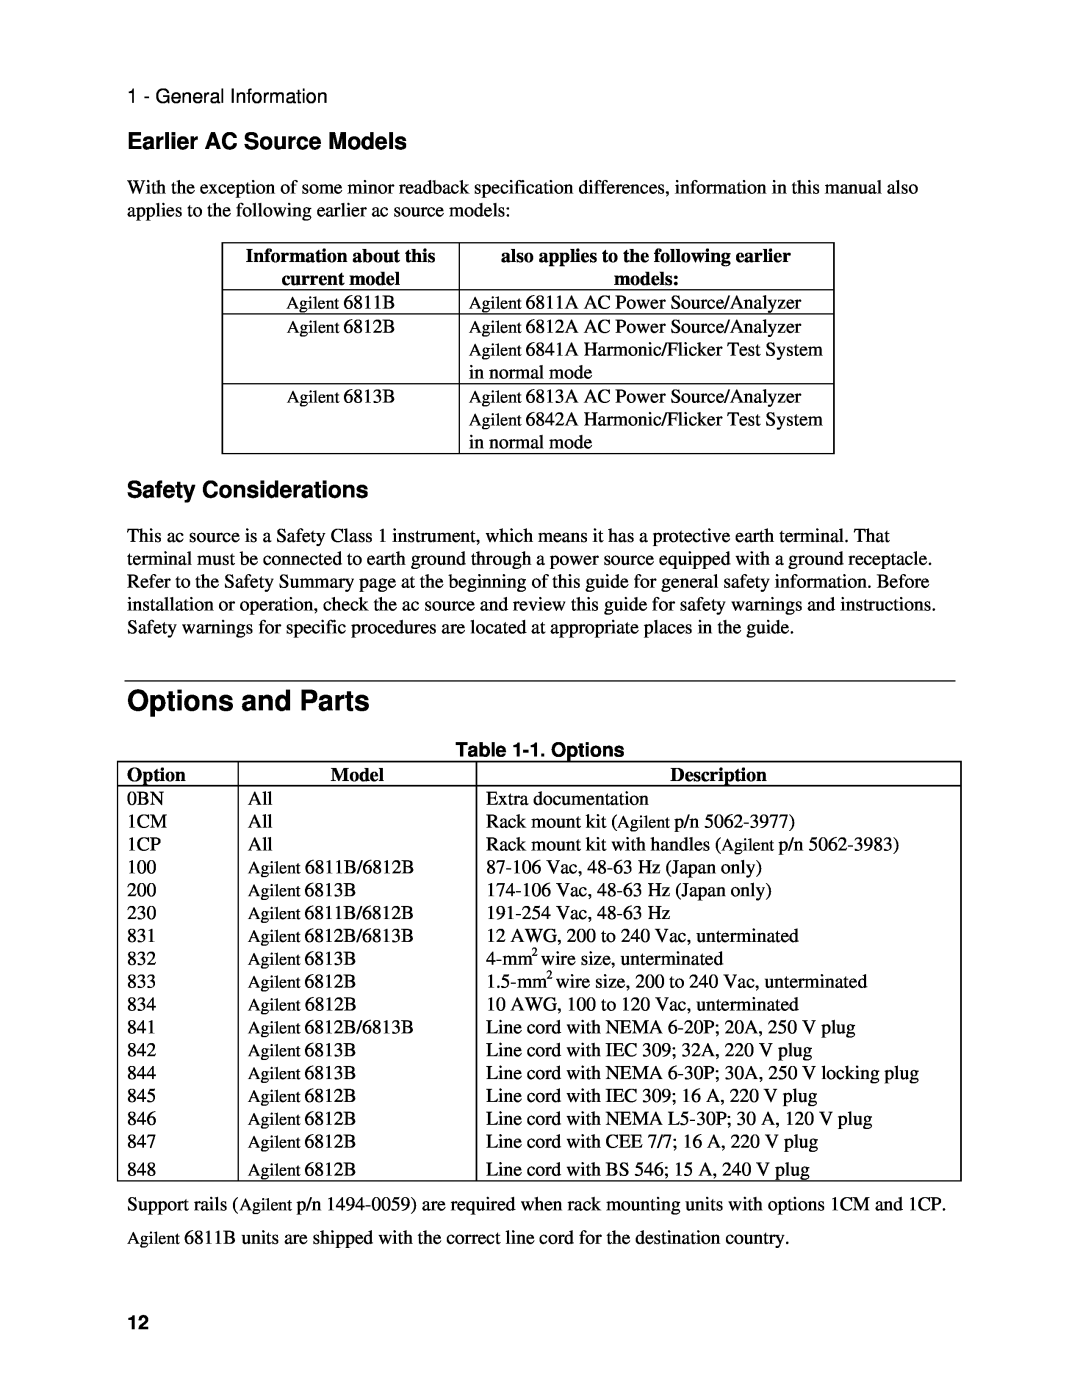 Agilent Technologies 6813B Options and Parts, Earlier AC Source Models, Safety Considerations, 1. Options, Description 